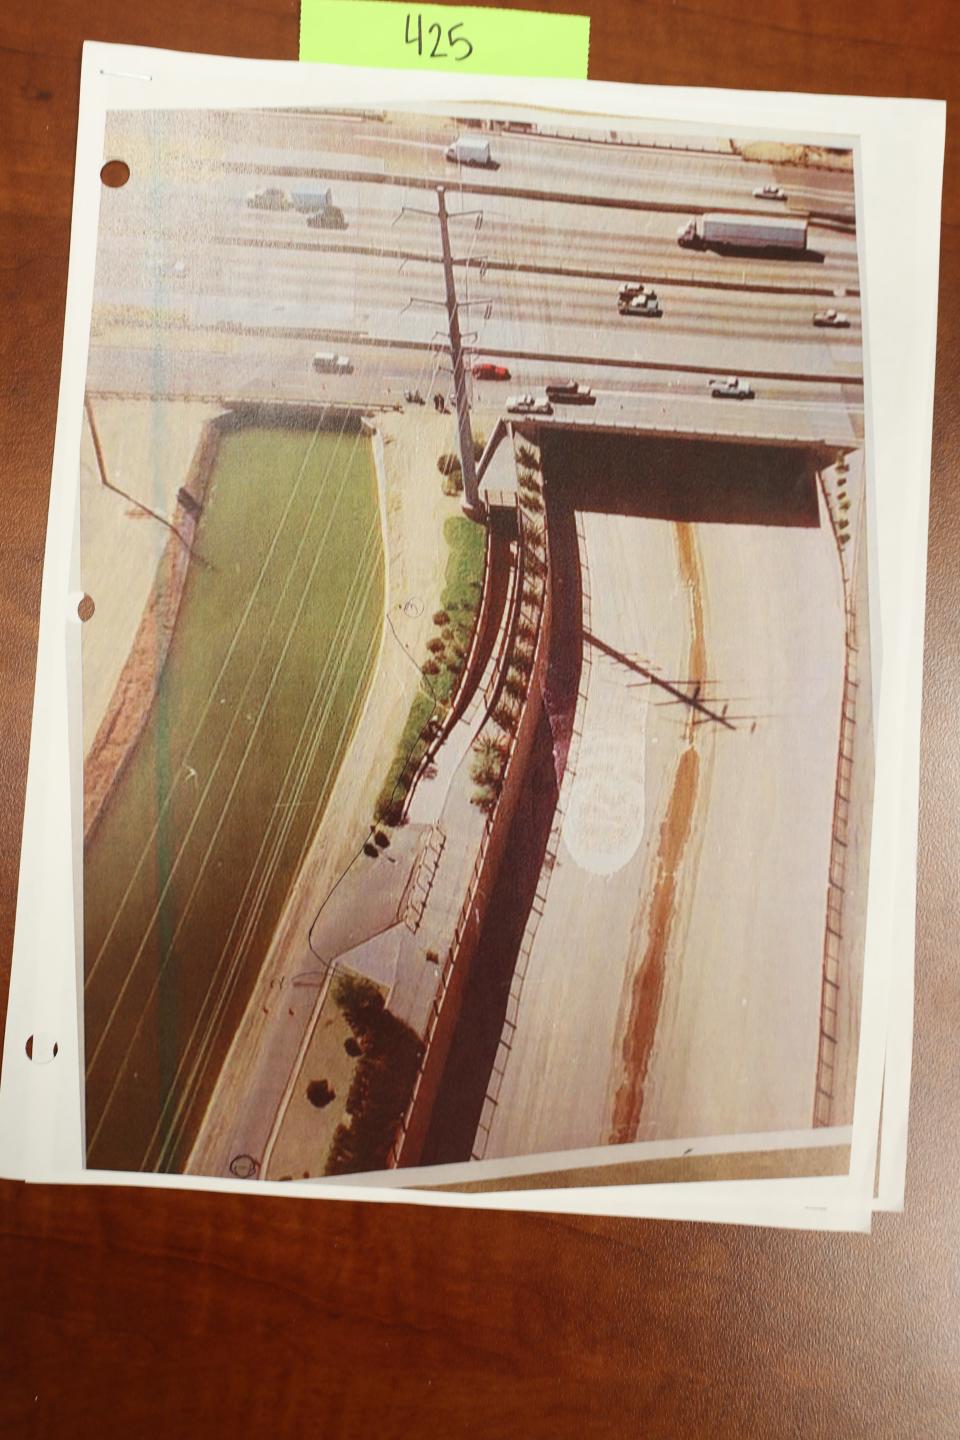 An aerial photograph of the Arizona Canal showing where Melanie Bernas' body was moved and found.